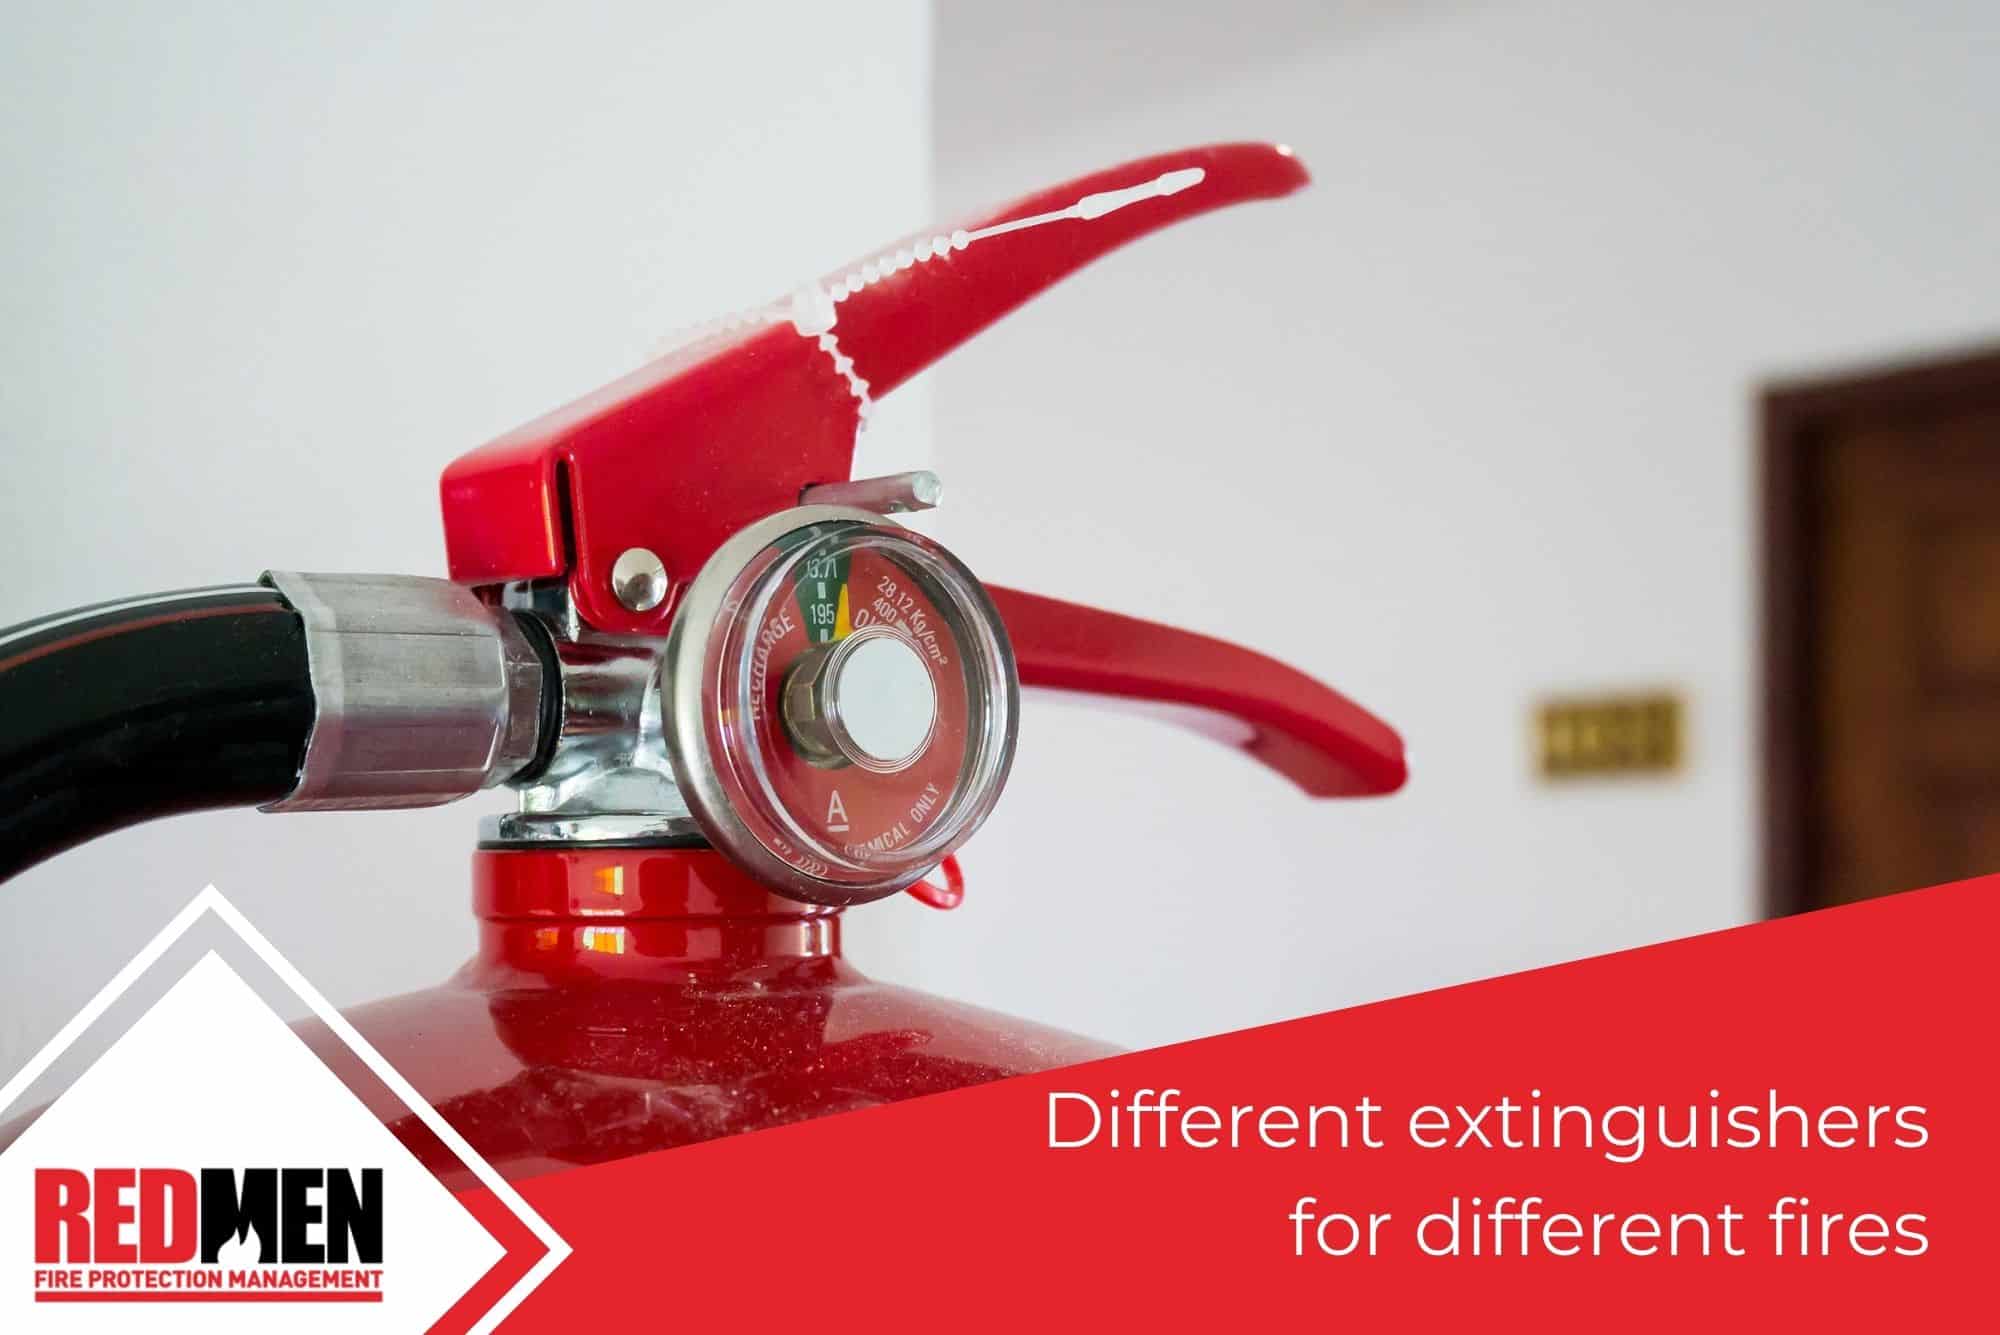 Different extinguishers for different fires